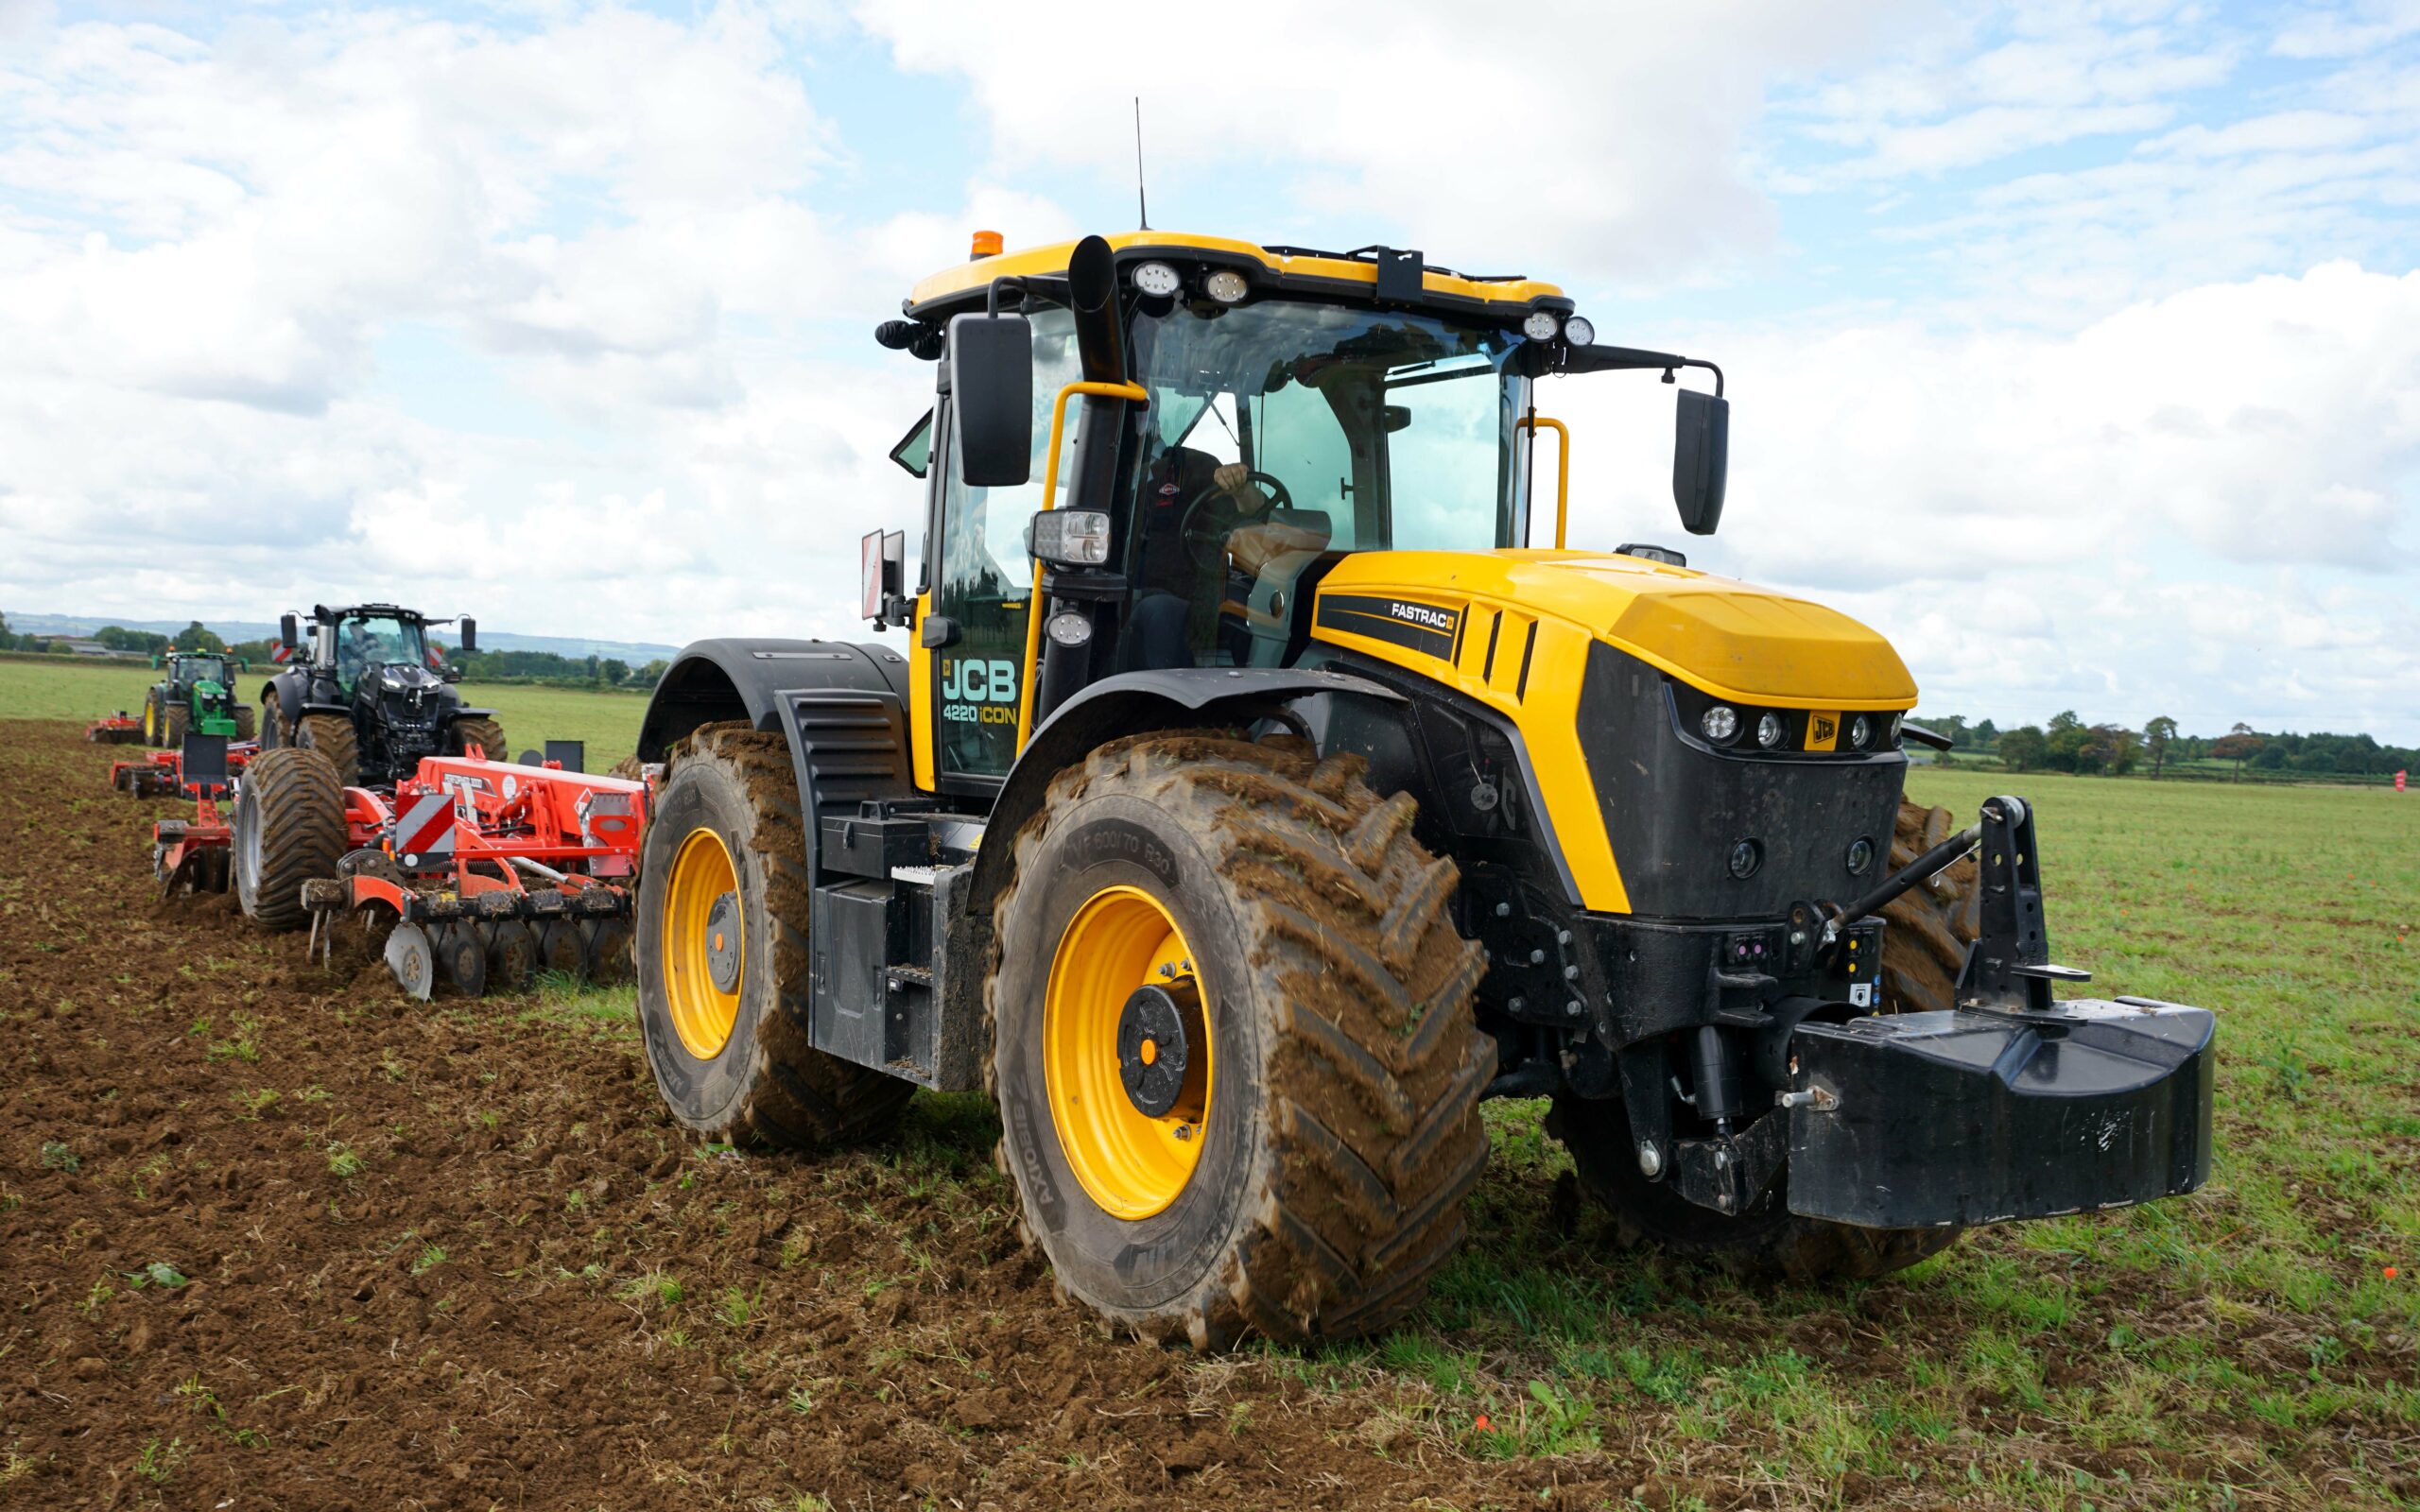 Focusing on machinery: Industry looks at carbon, farming and computing